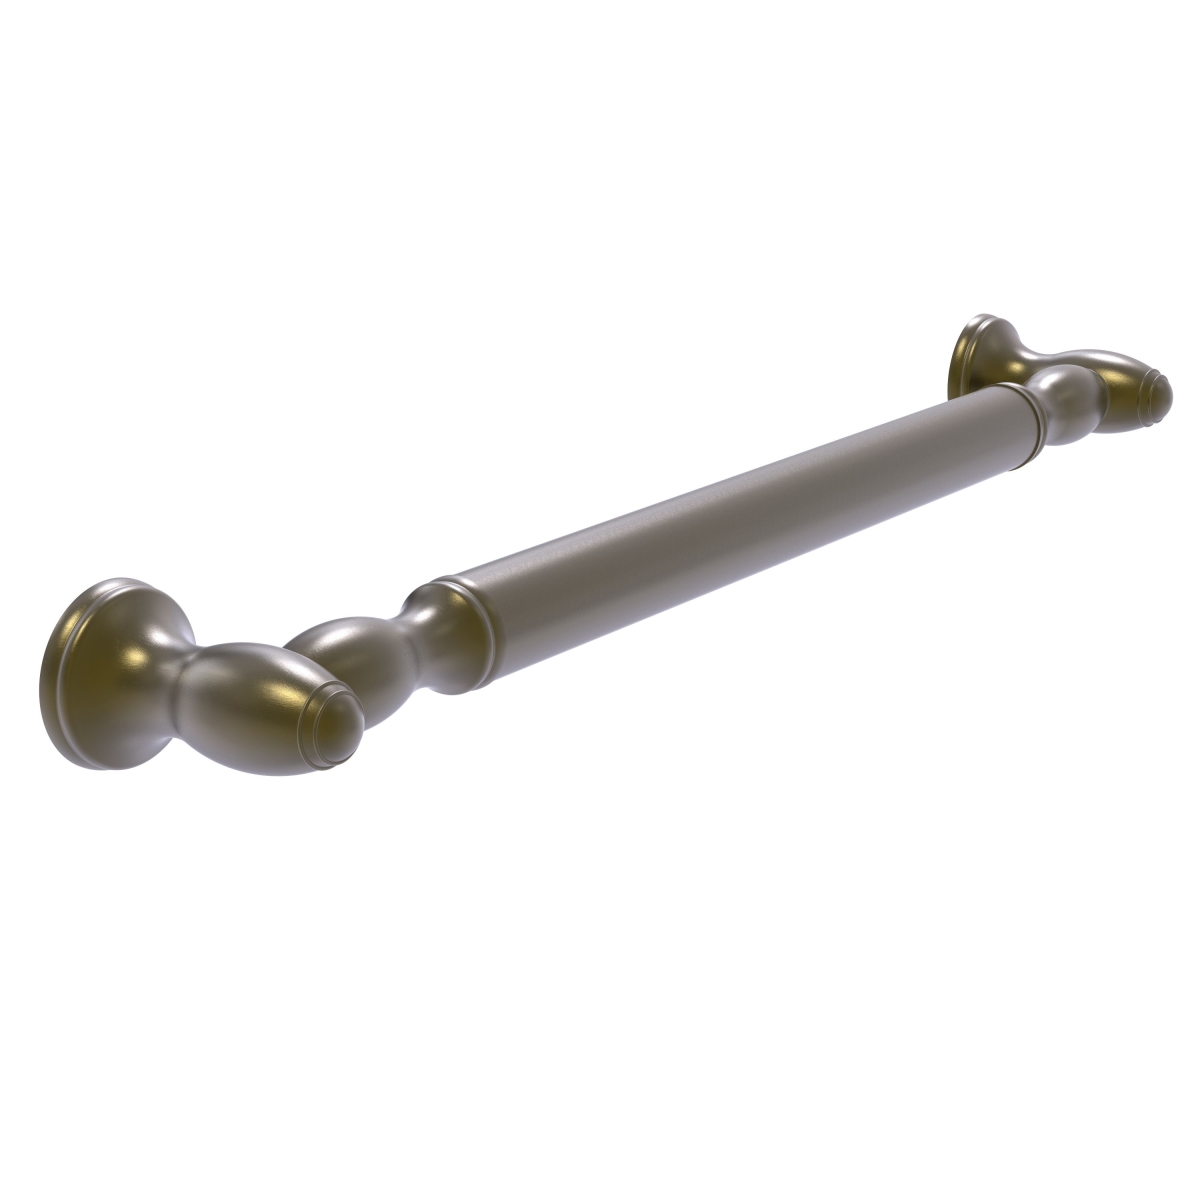 Picture of Allied Brass TD-GRS-24-ABR 24 in. Grab Bar Smooth, Antique Brass - 3.5 x 26 x 24 in.